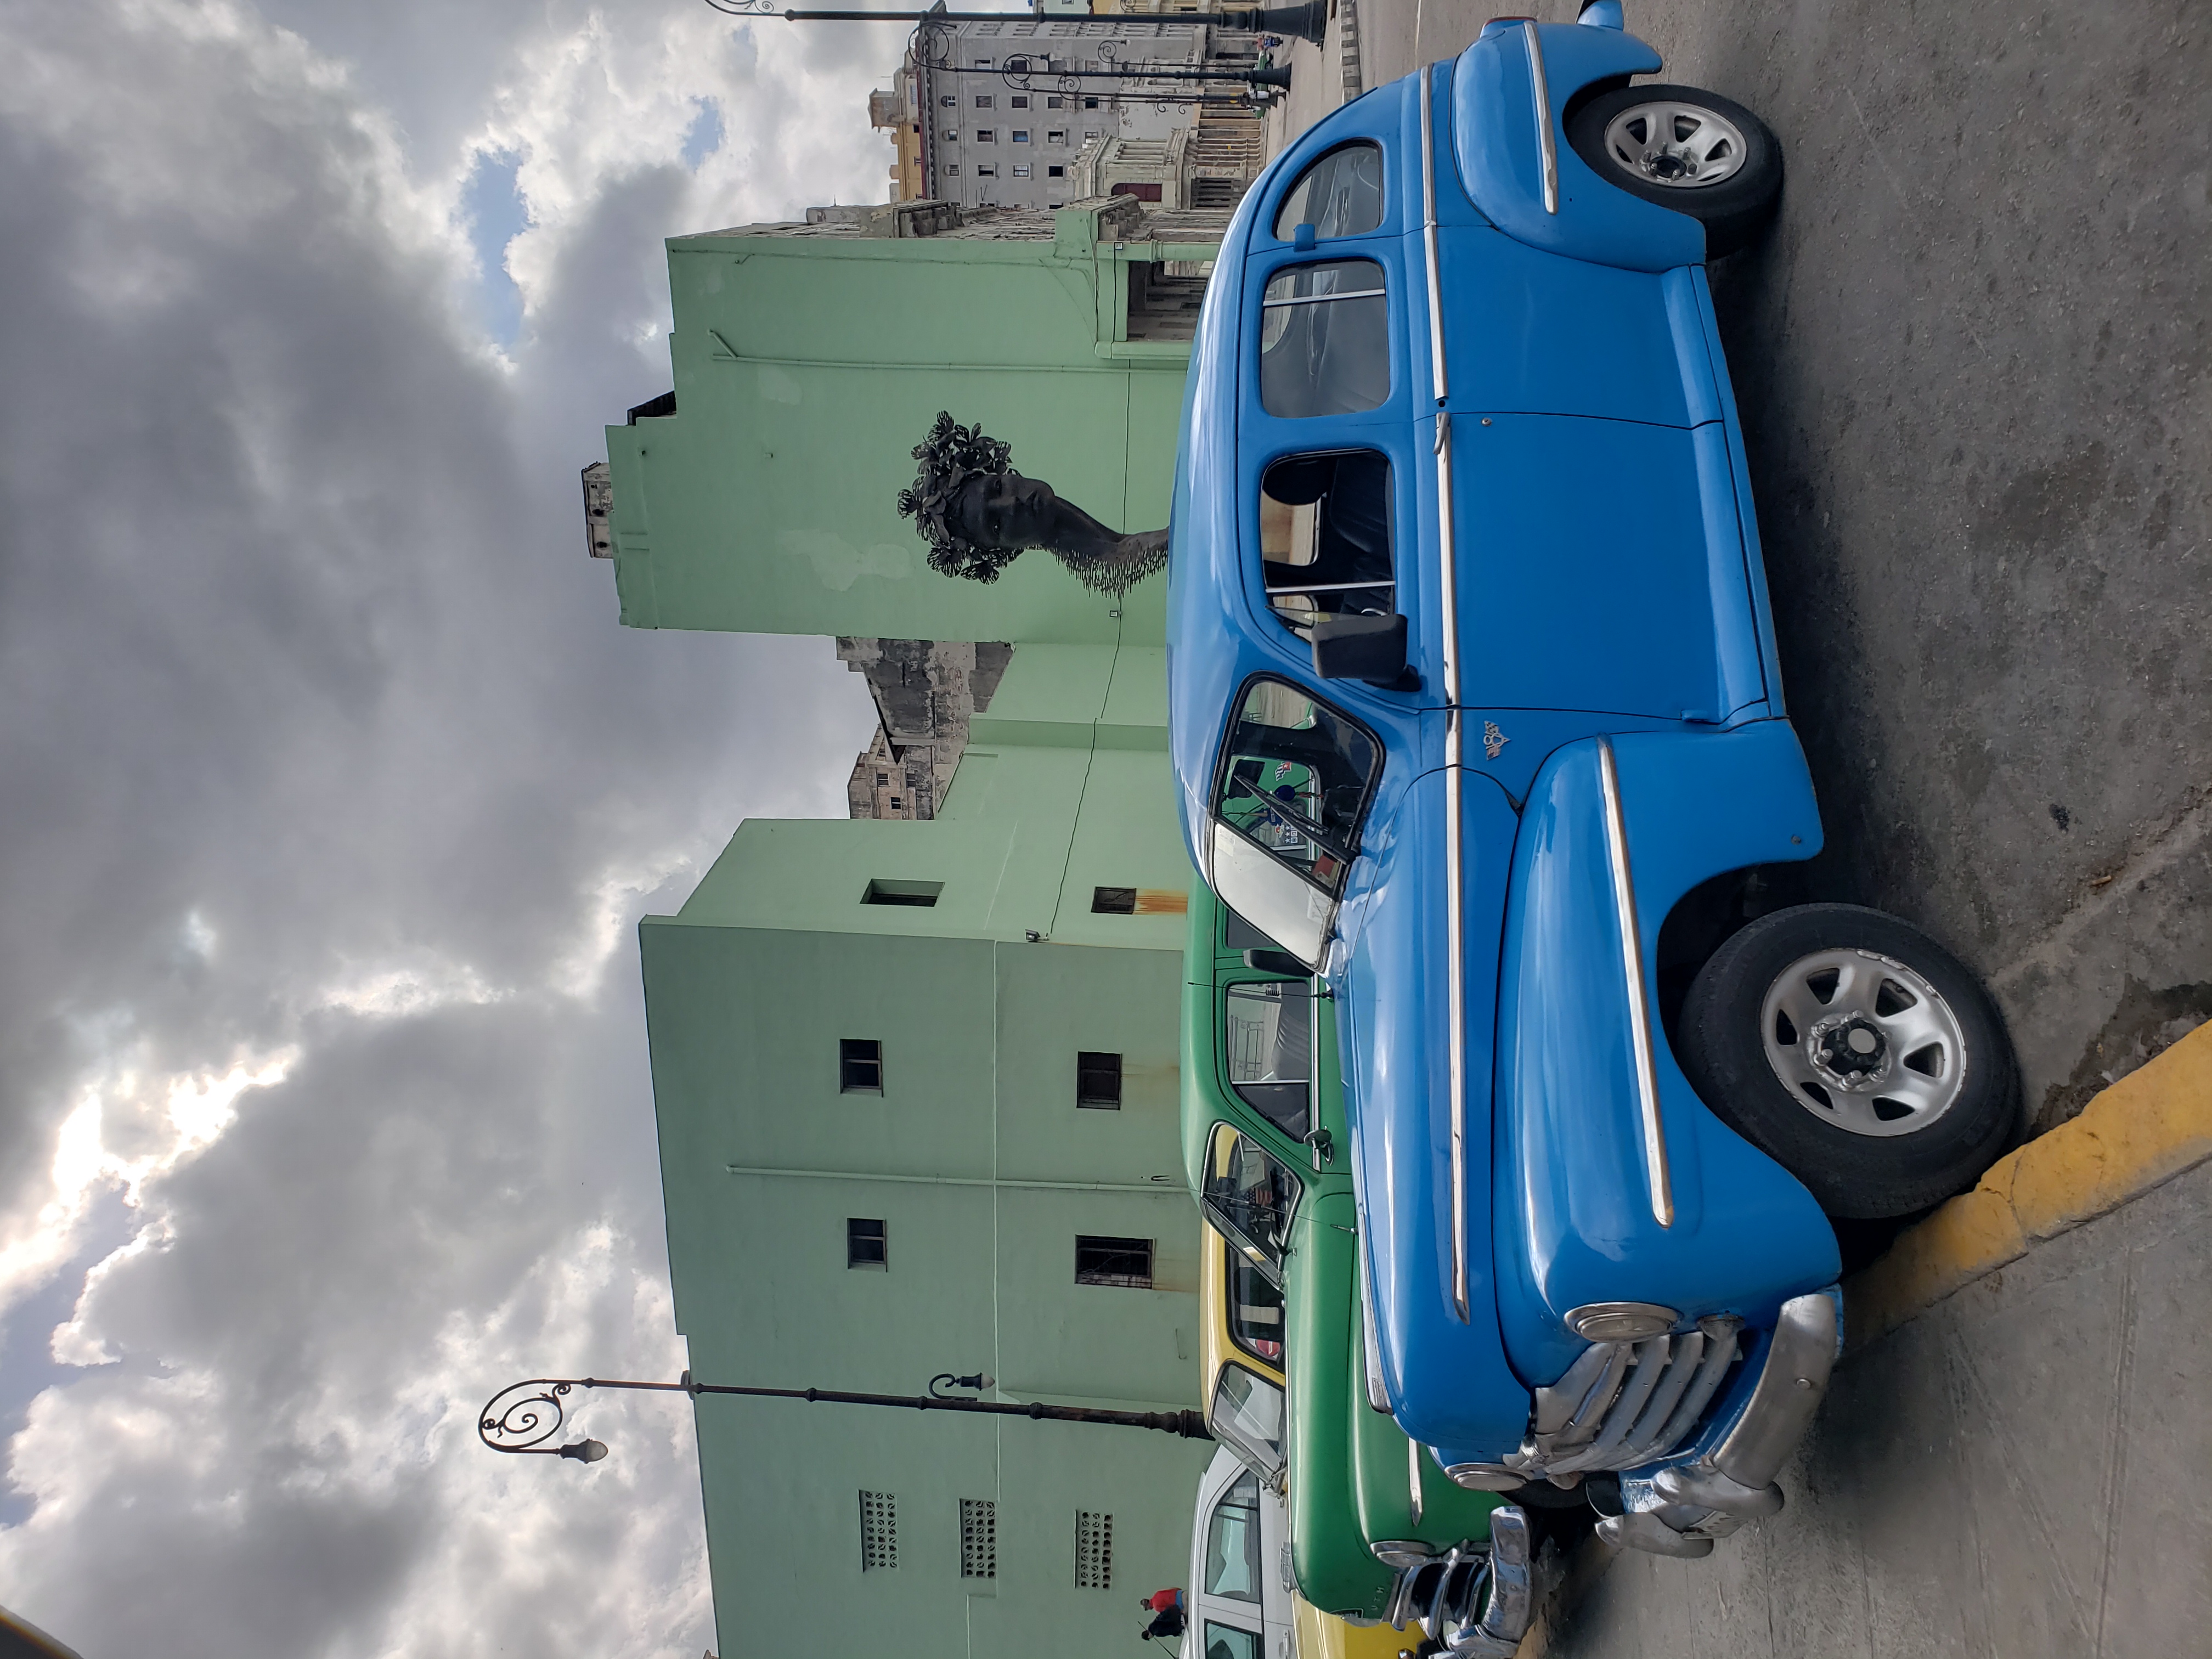 What lies beyond the classic cars? 3 classic cars in a row - blue, green, yellow. In Havana.